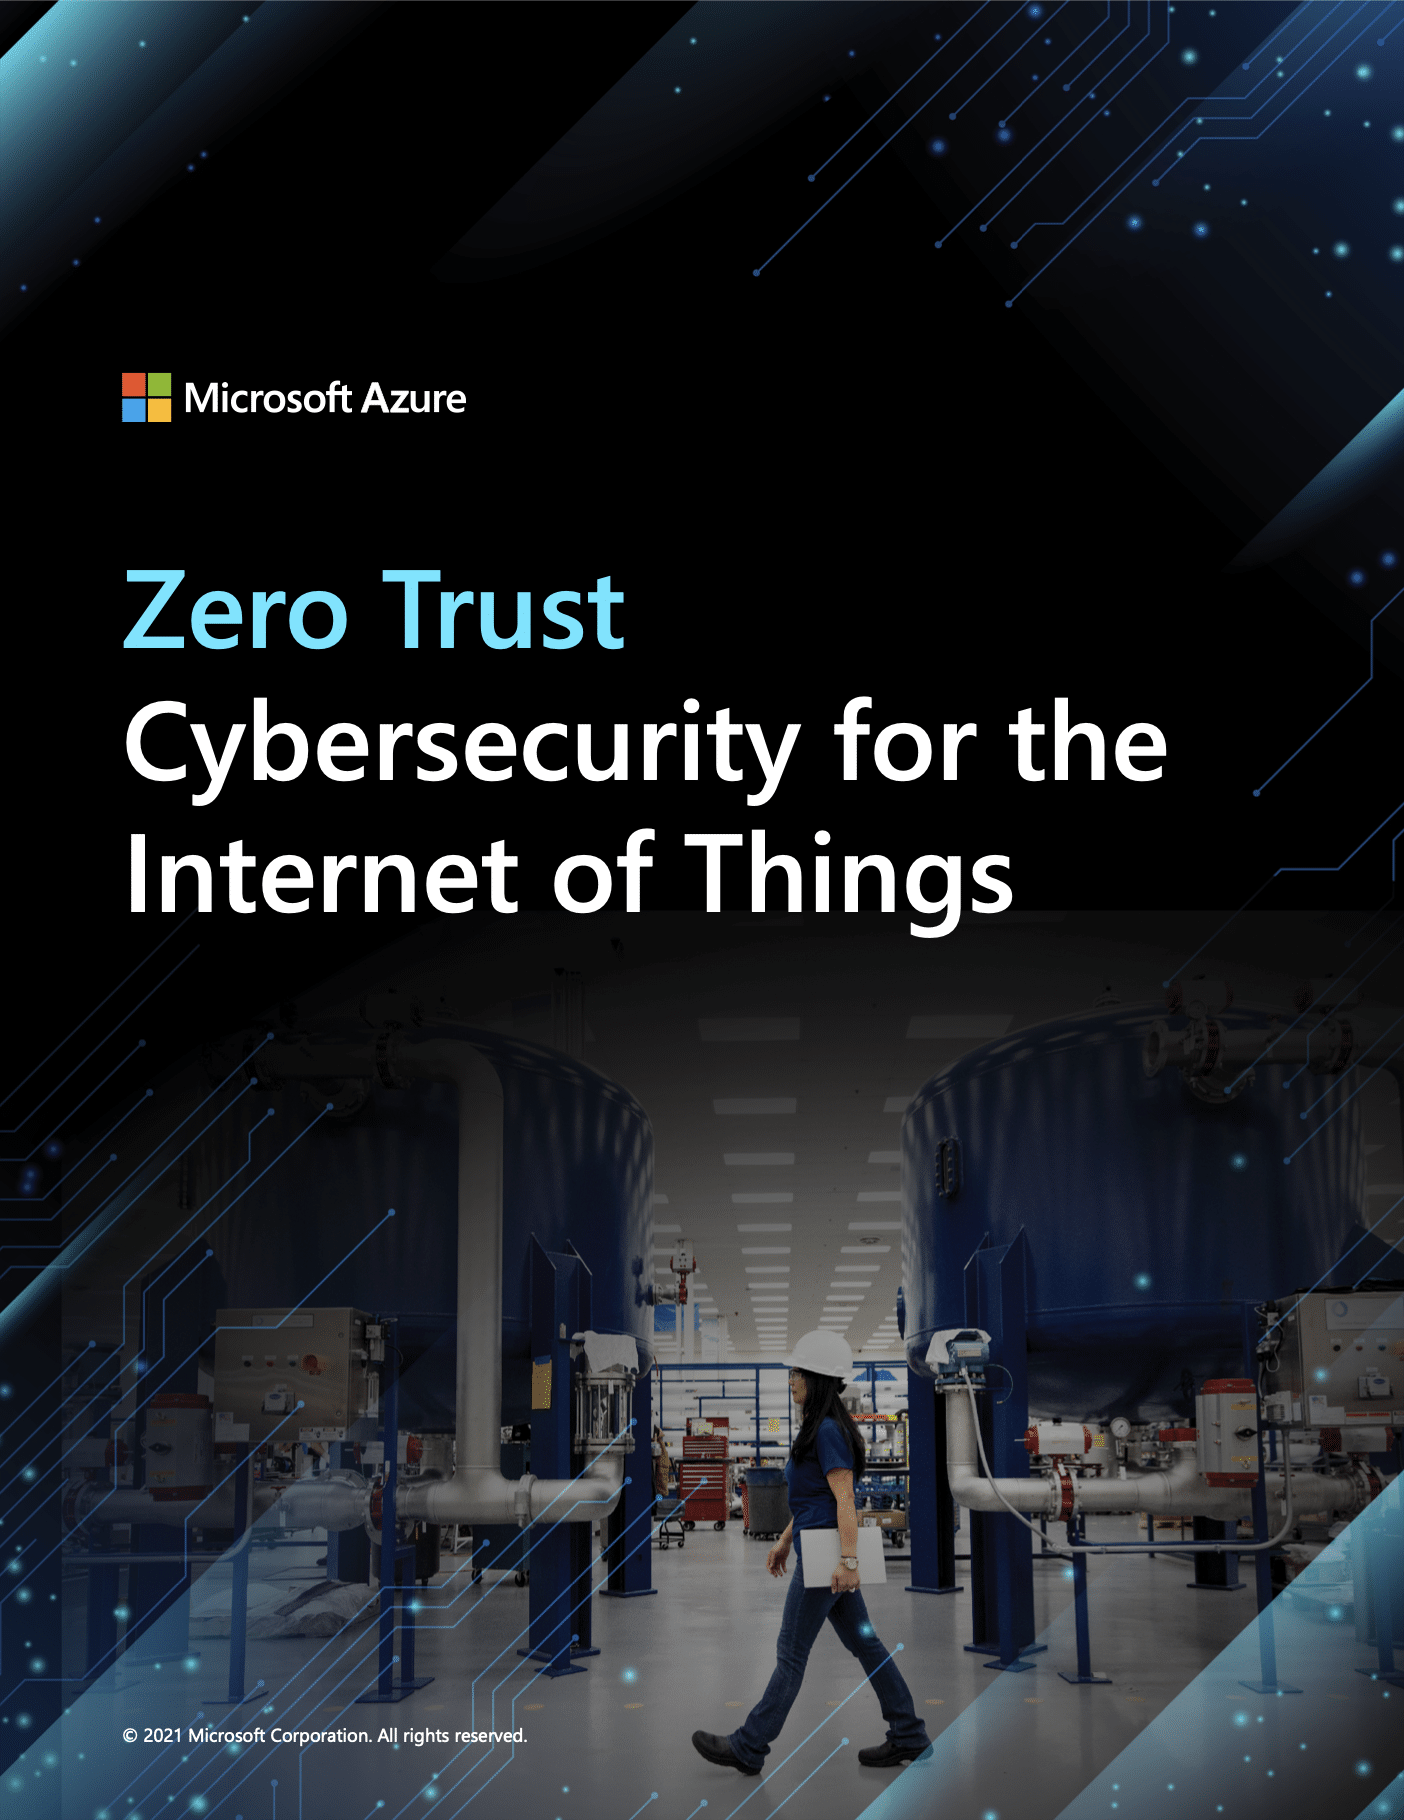 Zero Trust Cybersecurity for the Internet of Things 4